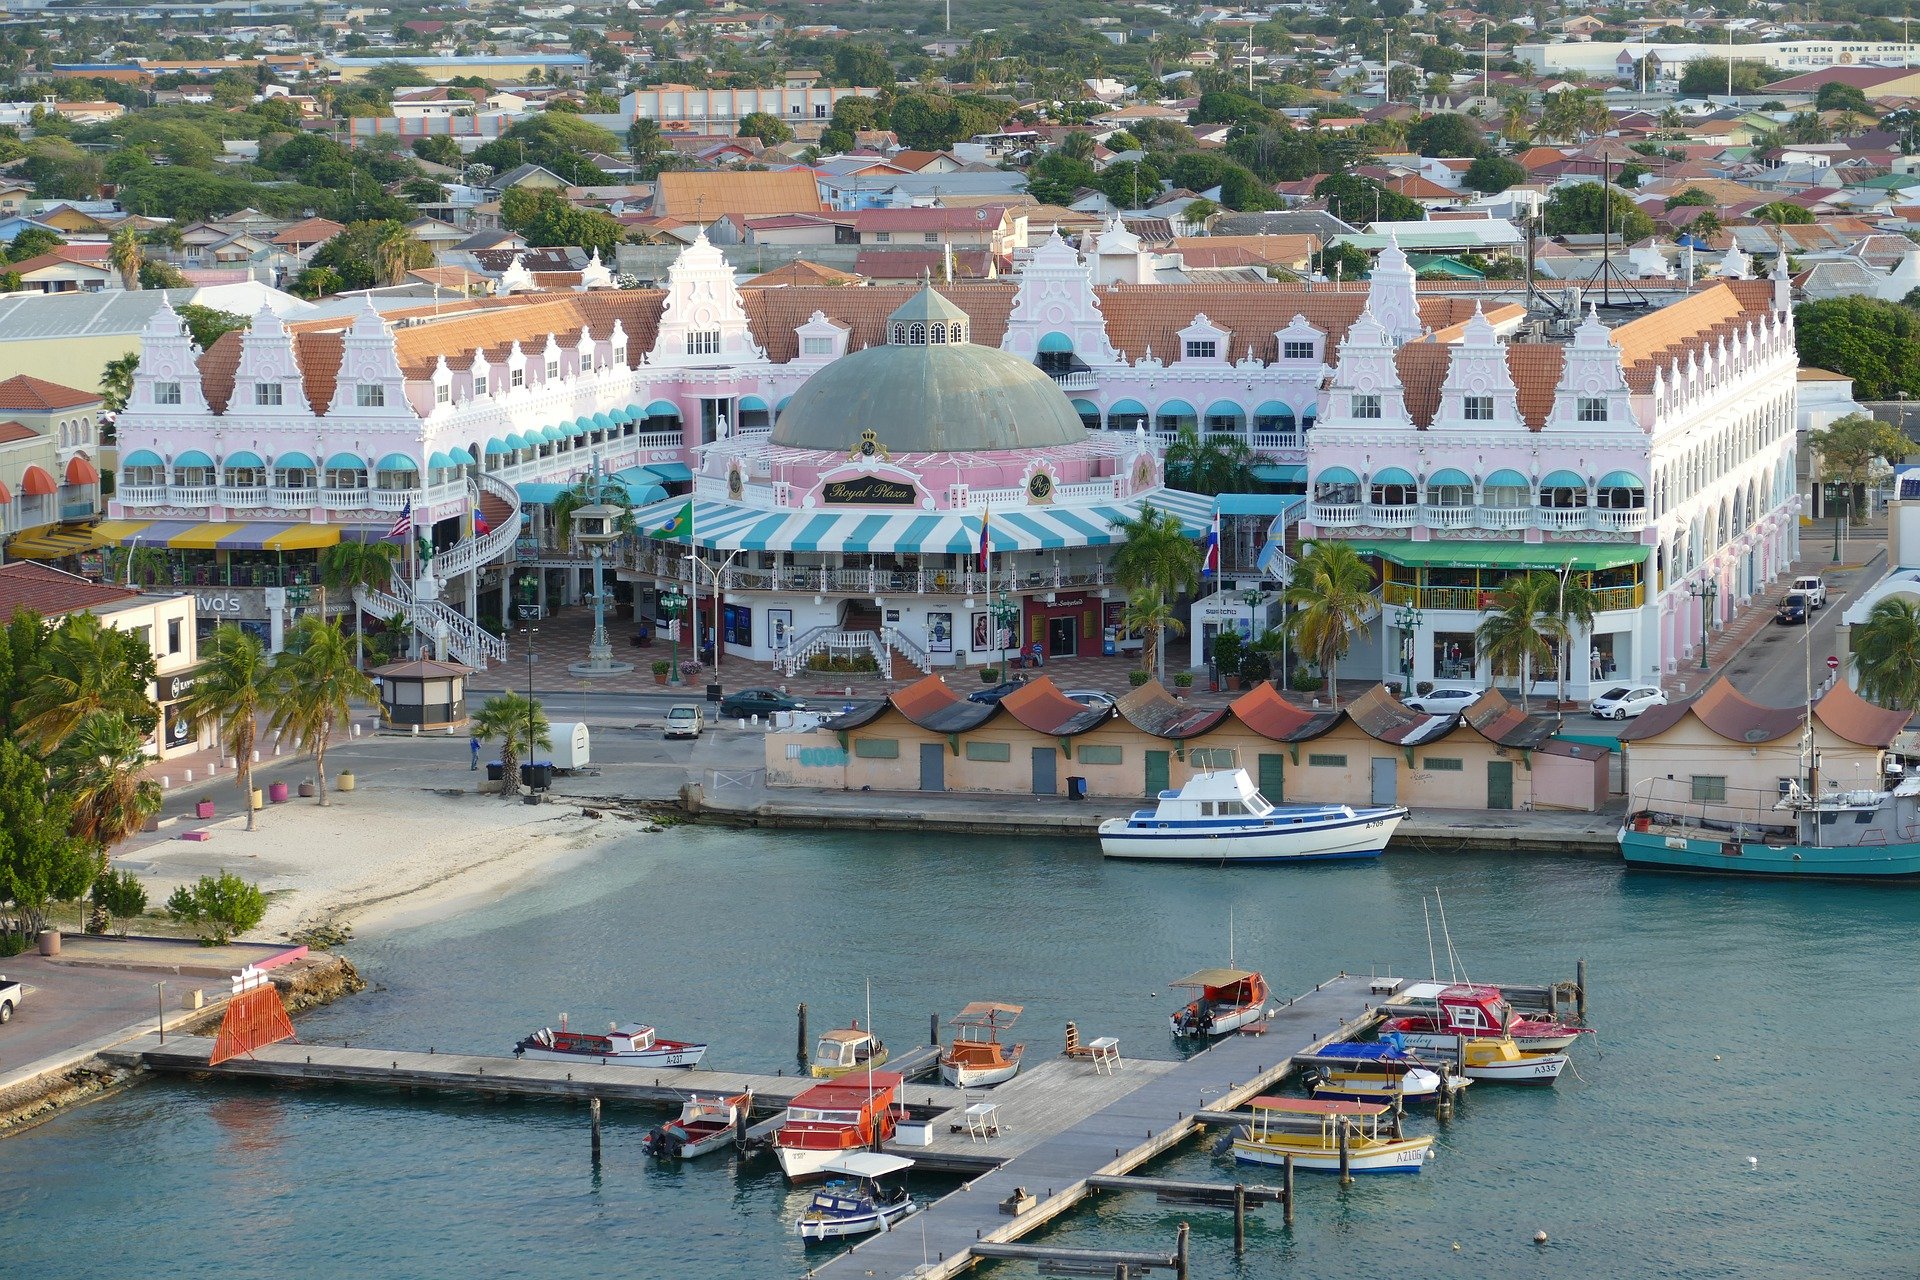 How To Get From Aruba Airport To Oranjestad - All Possible Ways, cheapest way from Aruba airport to Oranjestad